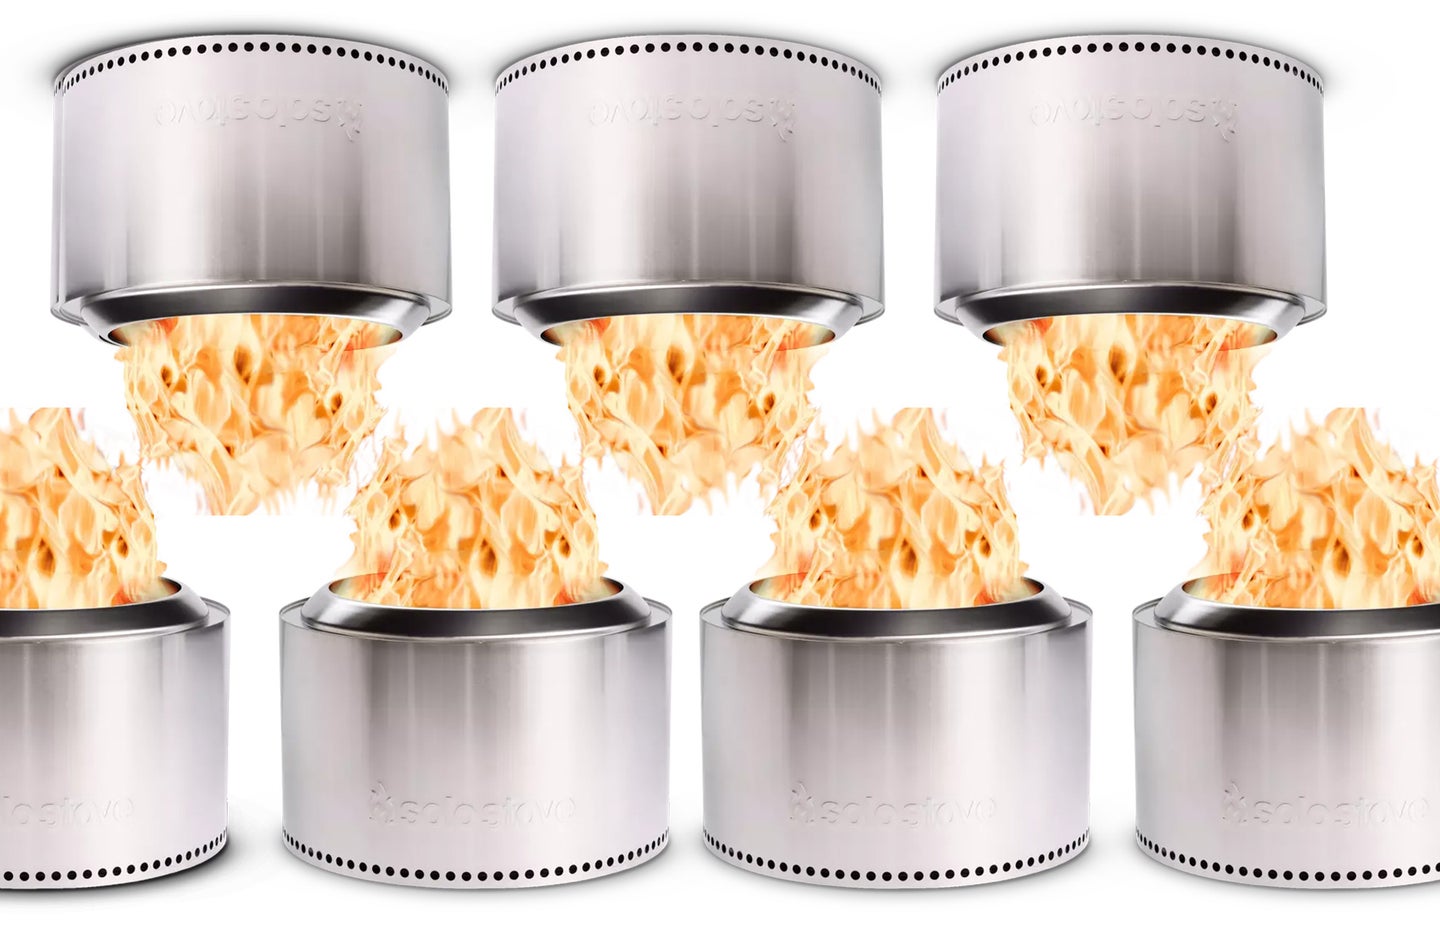 A bunch of Solo Stoves on a plain background. Some are upside down.